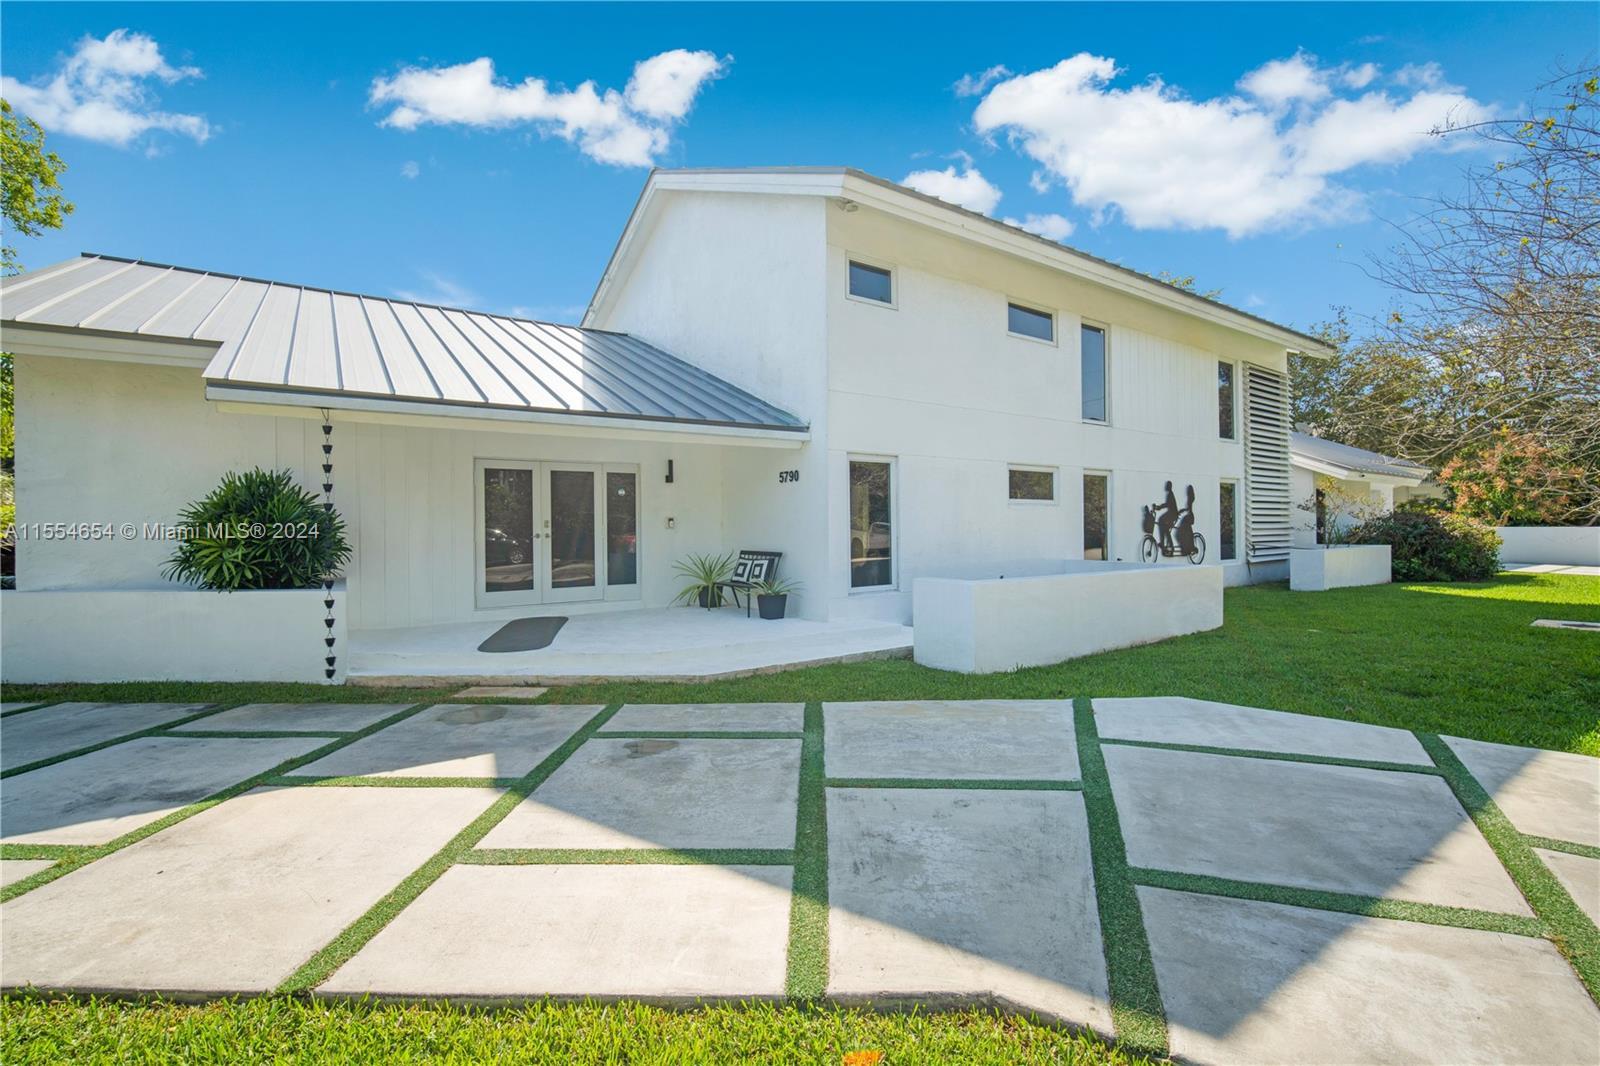 Gorgeous South Miami Home renovated to perfection! Enter this one-of-a-kind beauty with 6 Bedrooms, 